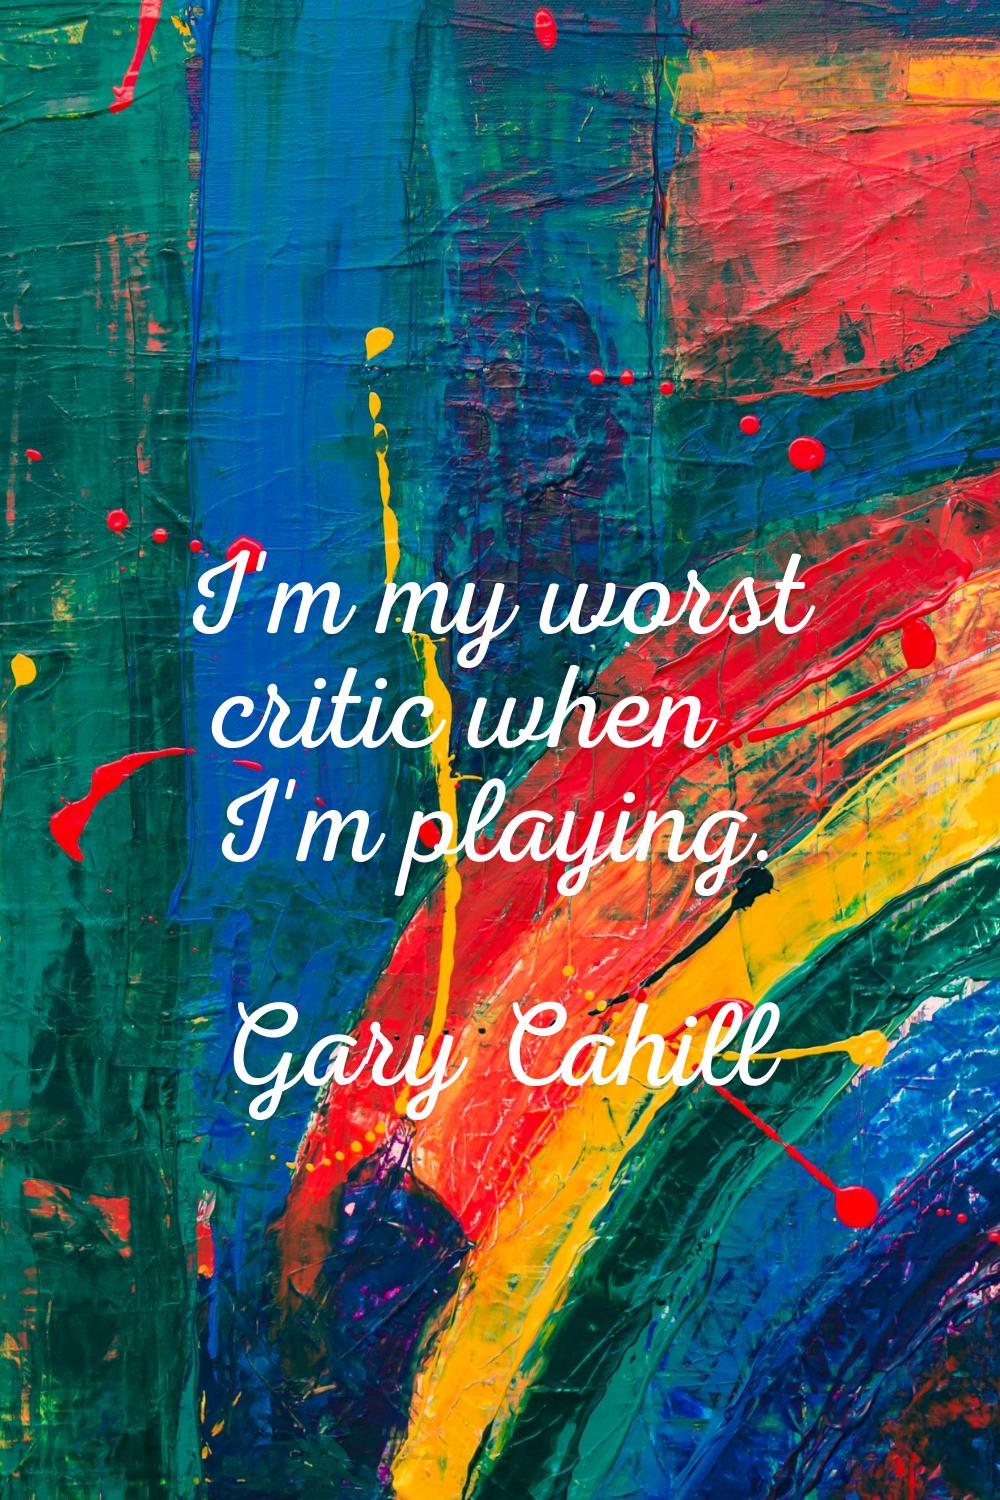 I'm my worst critic when I'm playing.